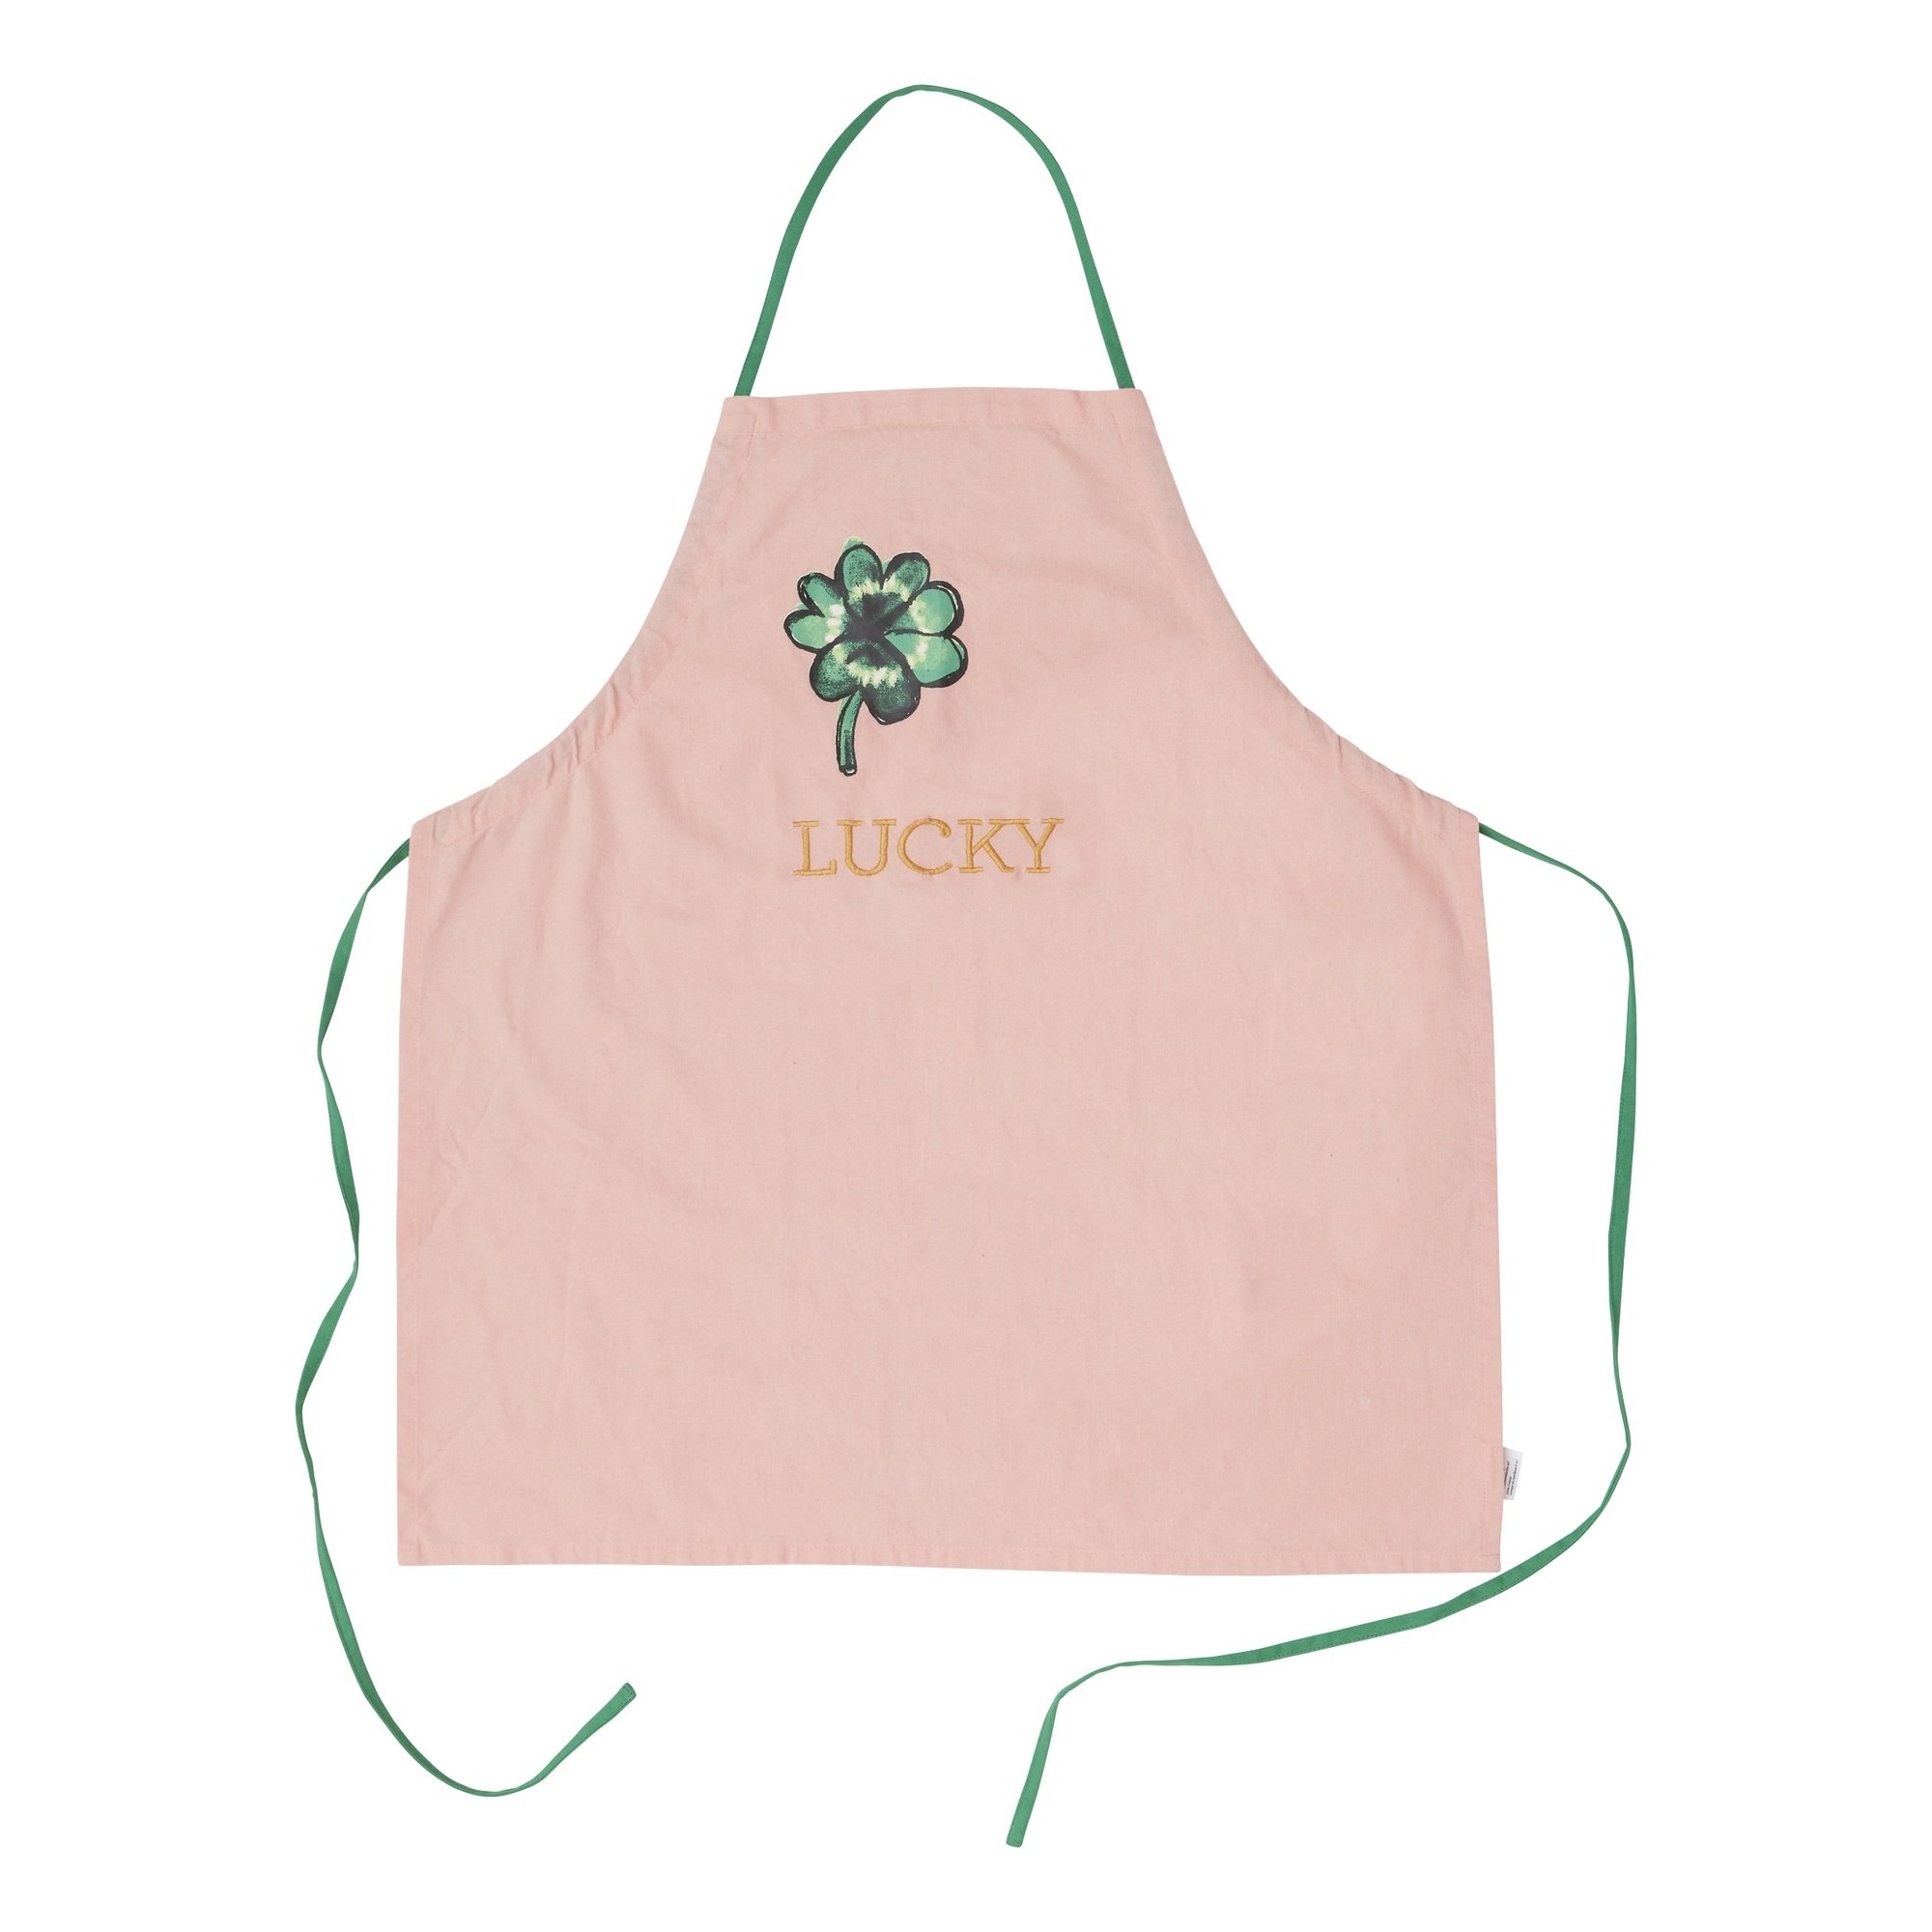 Rice - Cotton Apron Good Luck Print in Soft Pink